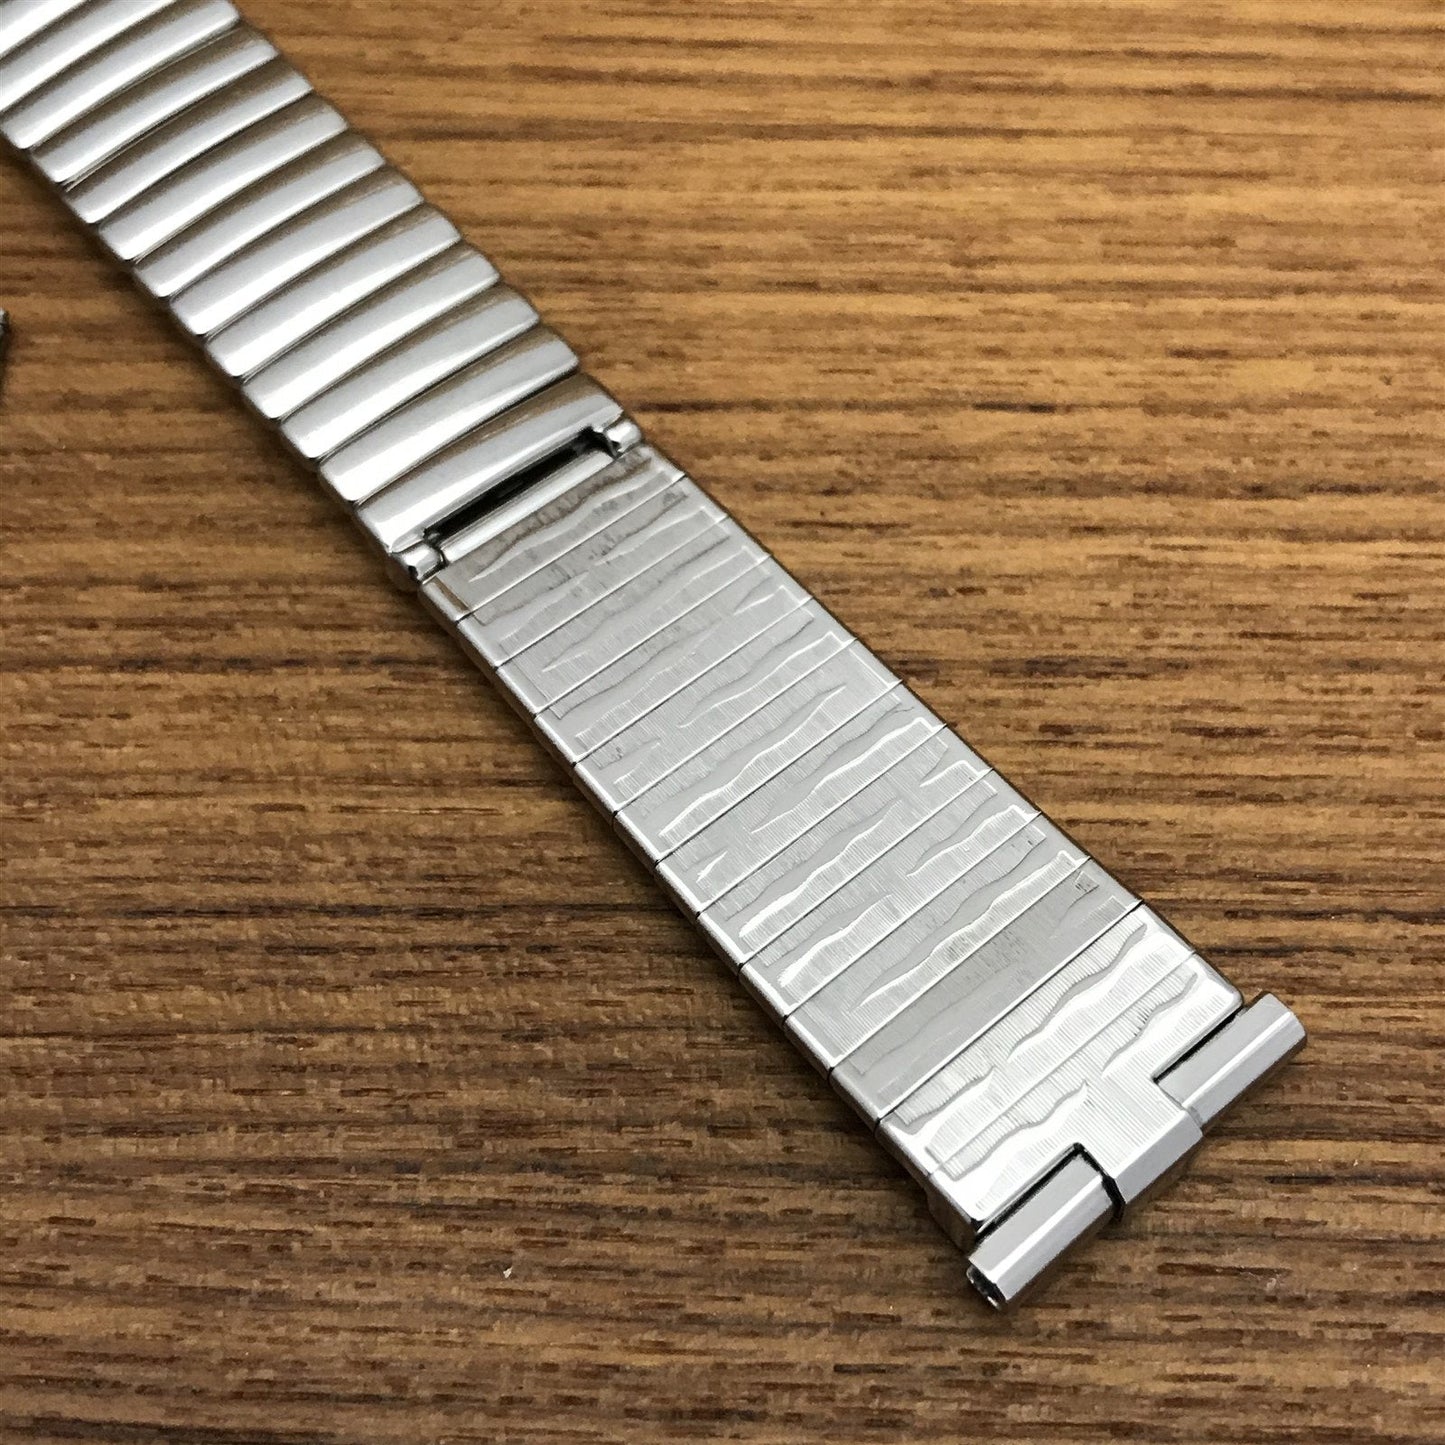 19mm 18mm JB Champion Stainless Steel Tiger-Stripe 1960s nos Vintage Watch Band